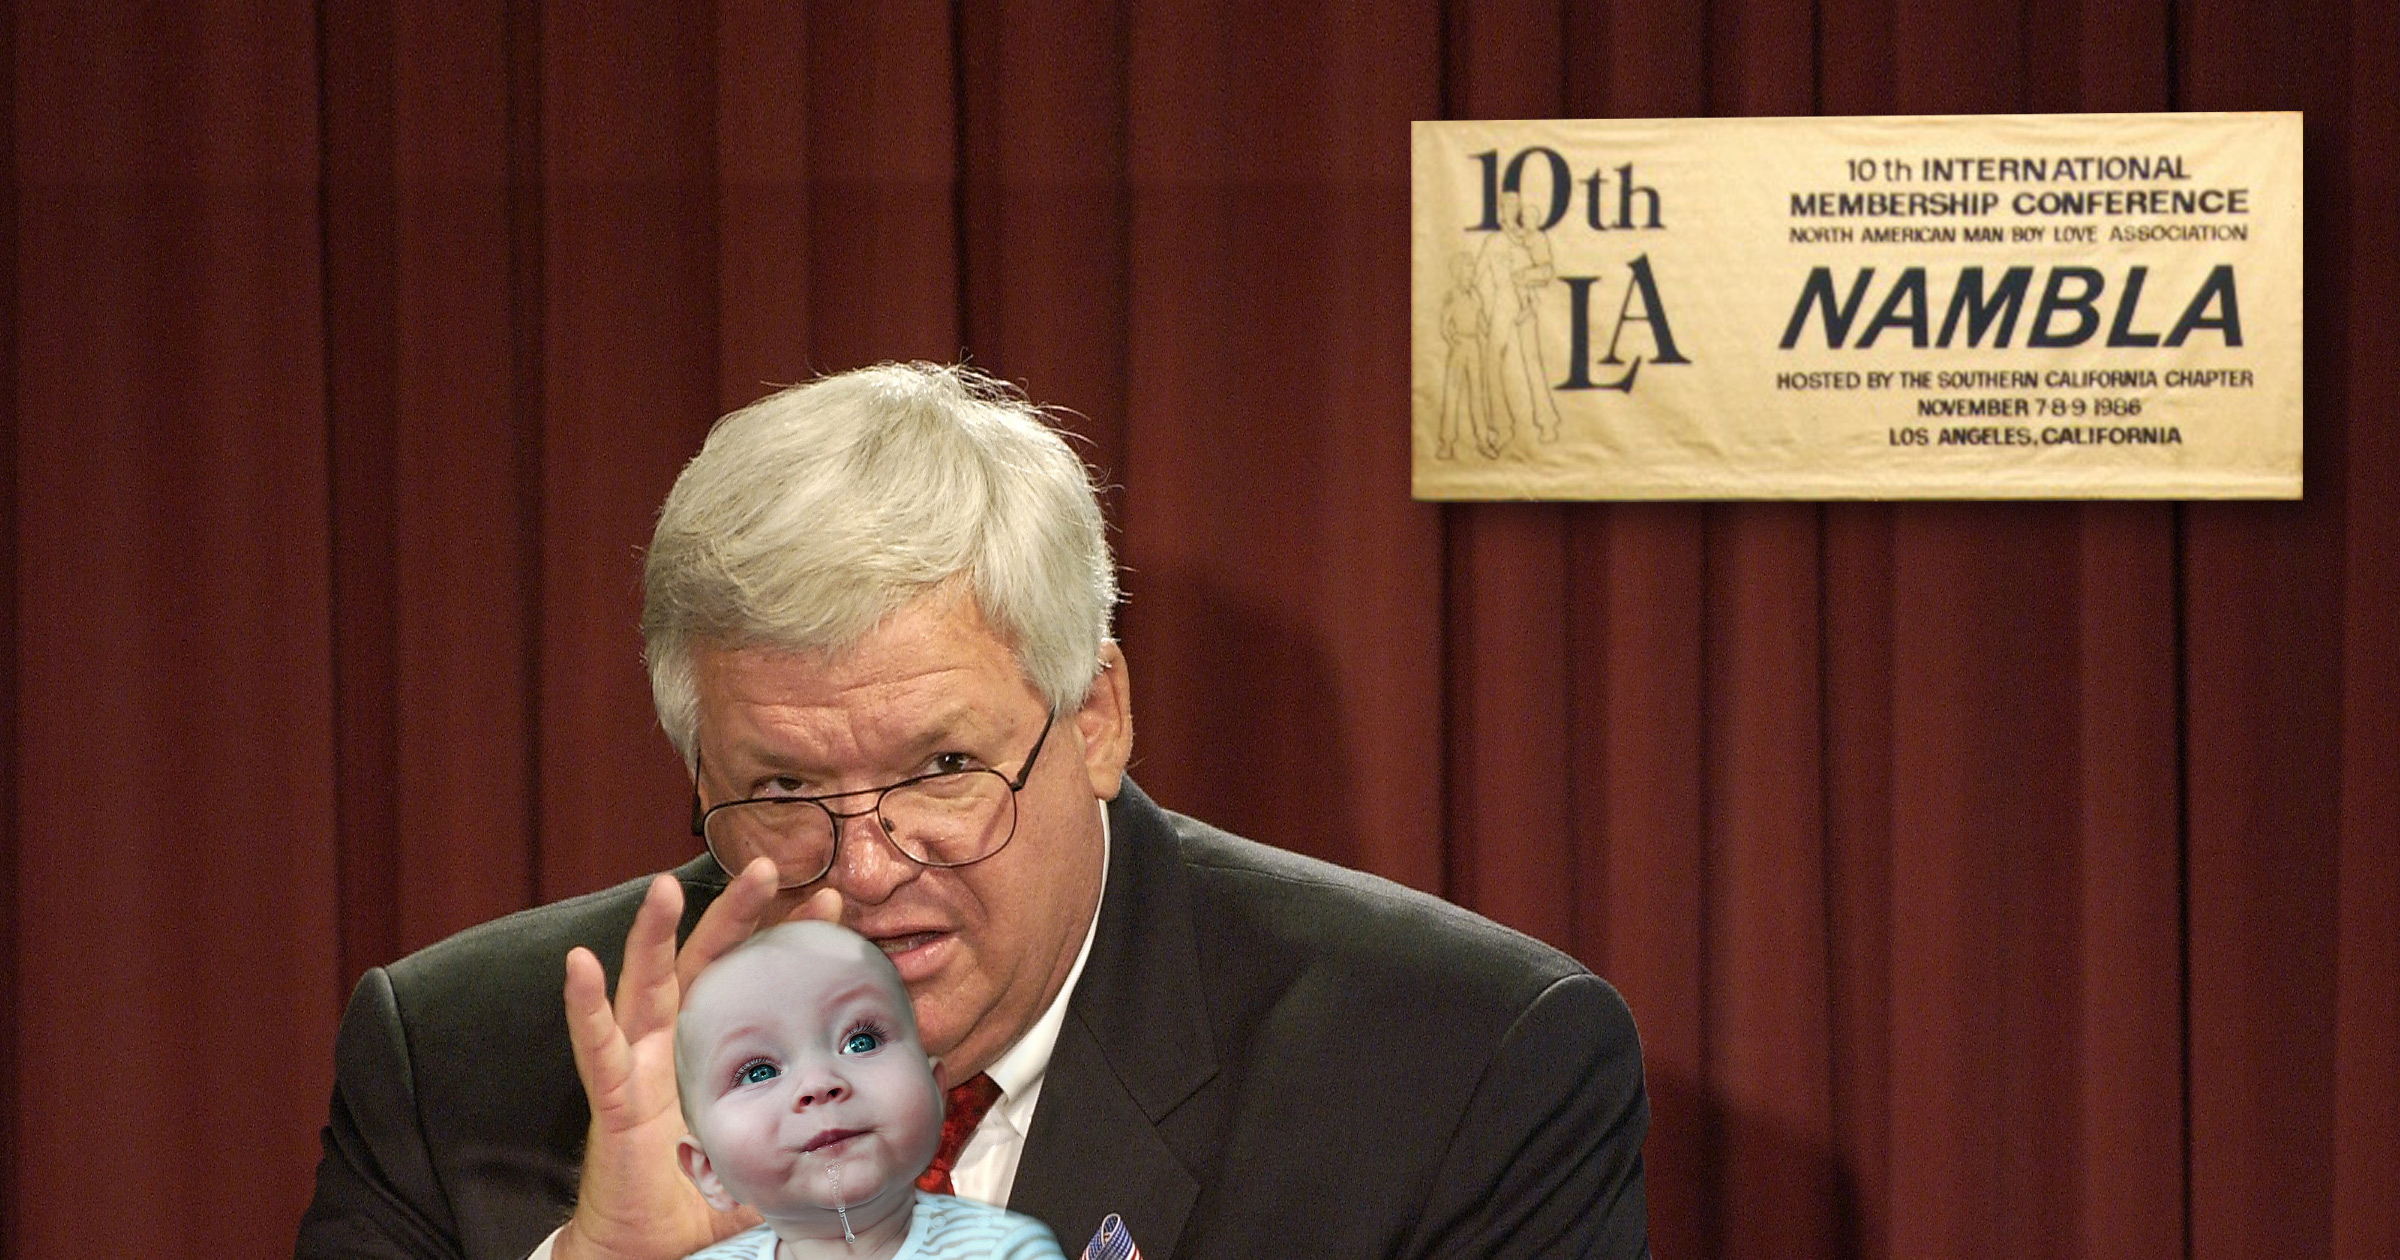 Dennis Hastert indicted was he involved in child molestation?